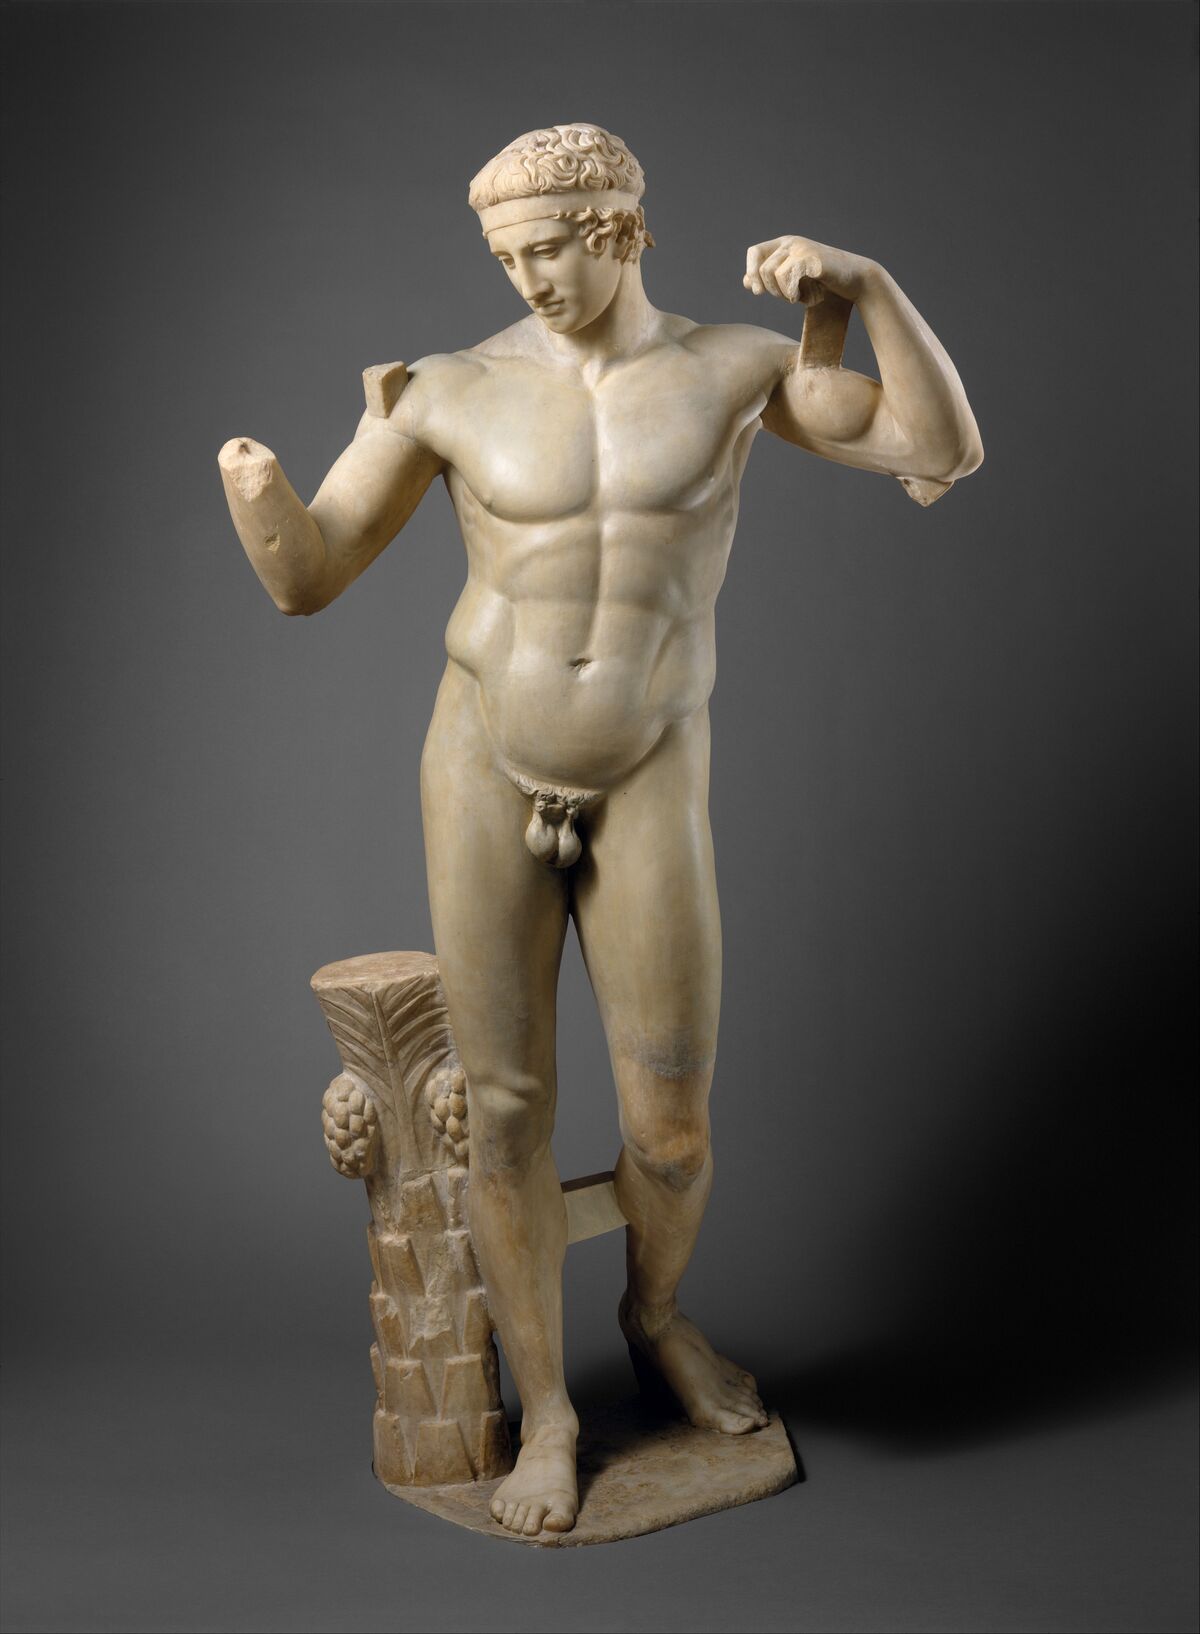 Copy of work attributed to Polykleitos, ca. A.D. 69–96, via the Metropolitan Museum of Art. 